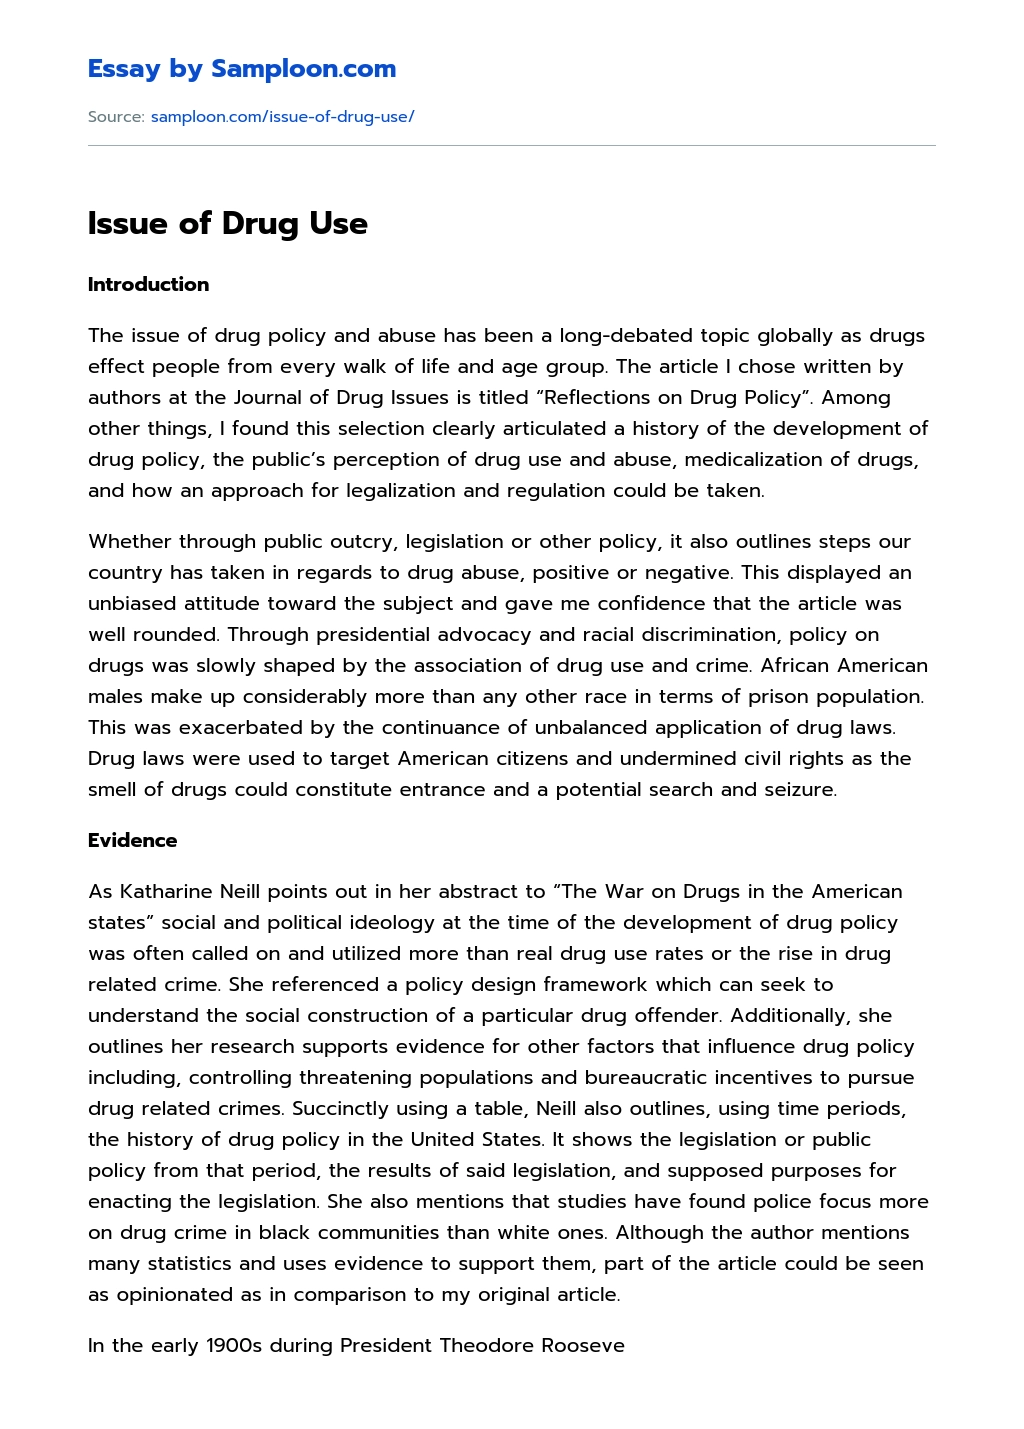 Issue of Drug Use essay